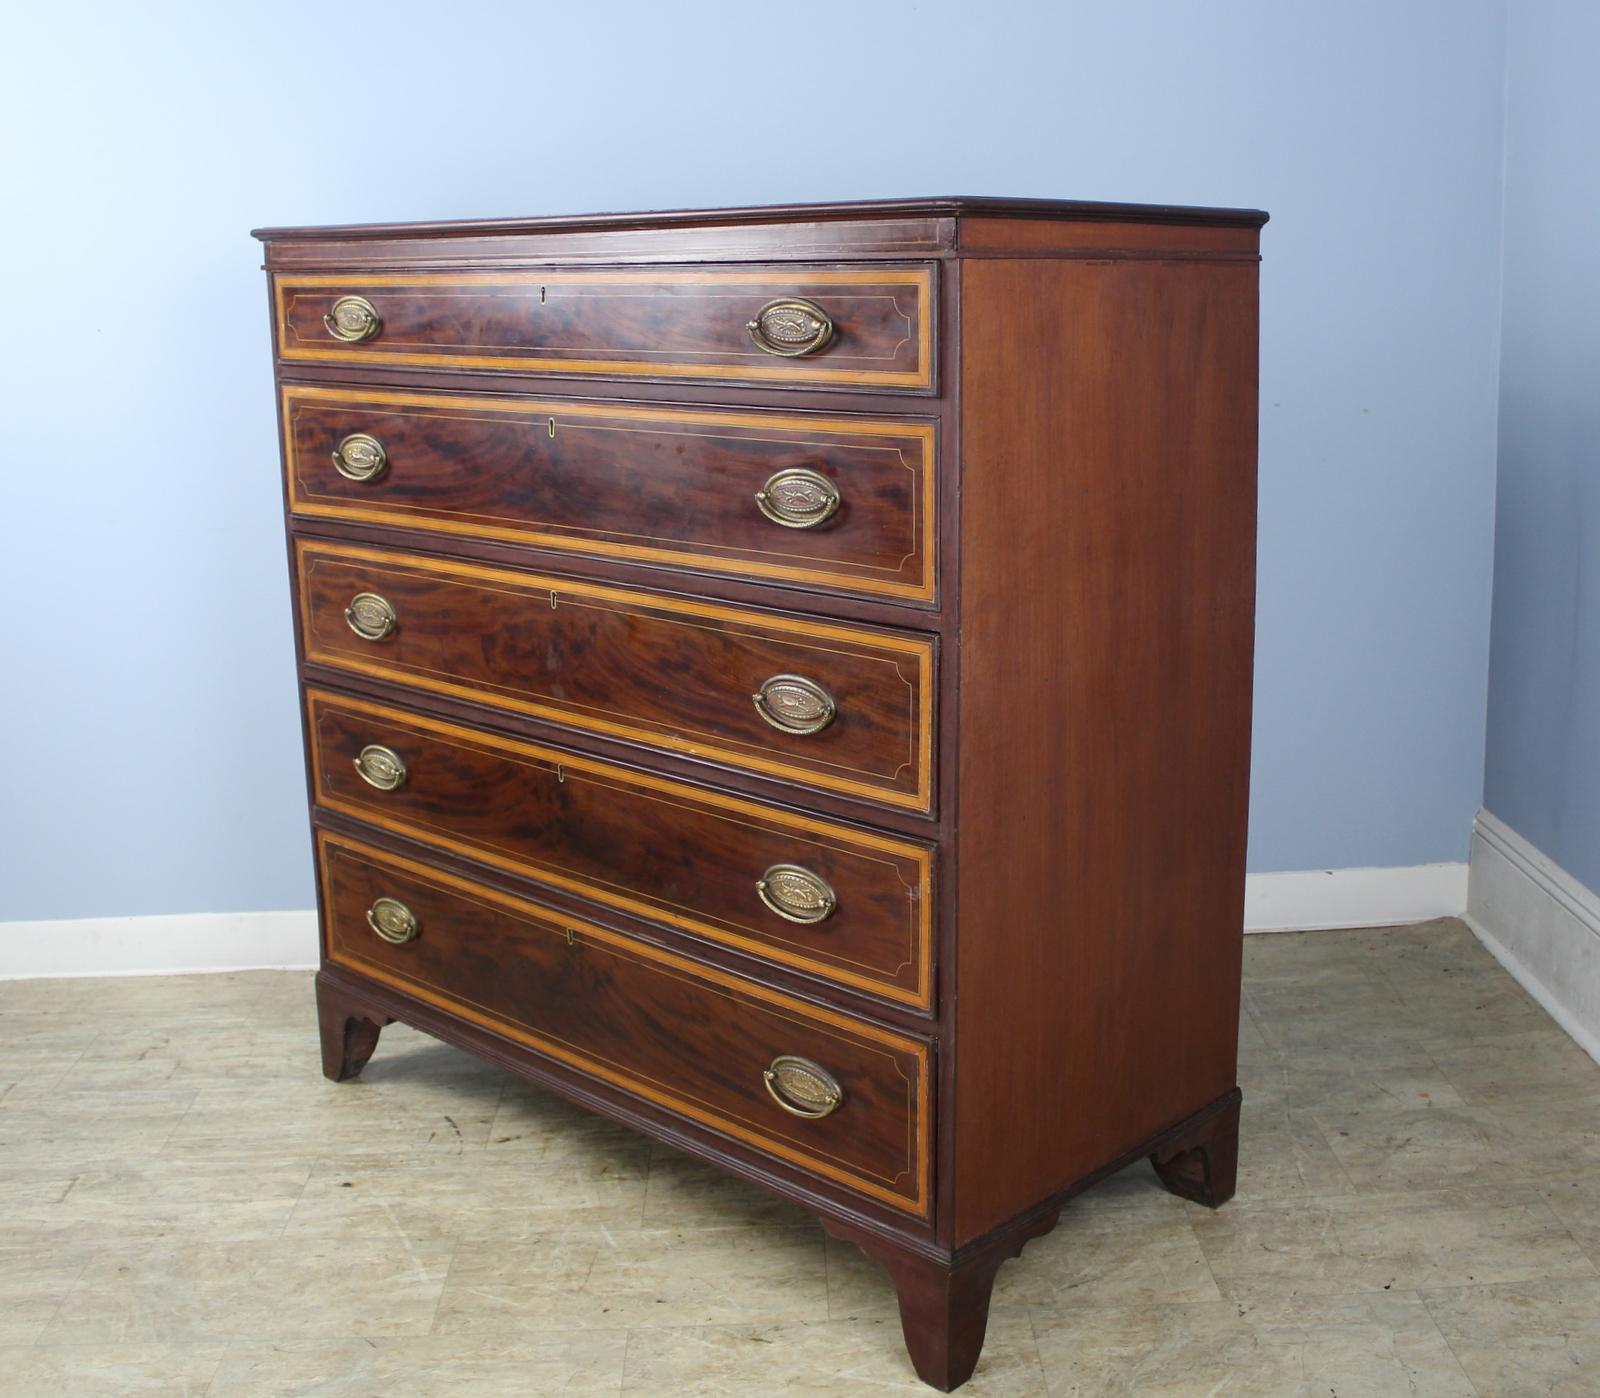 antique dresser with 2 small drawers on top